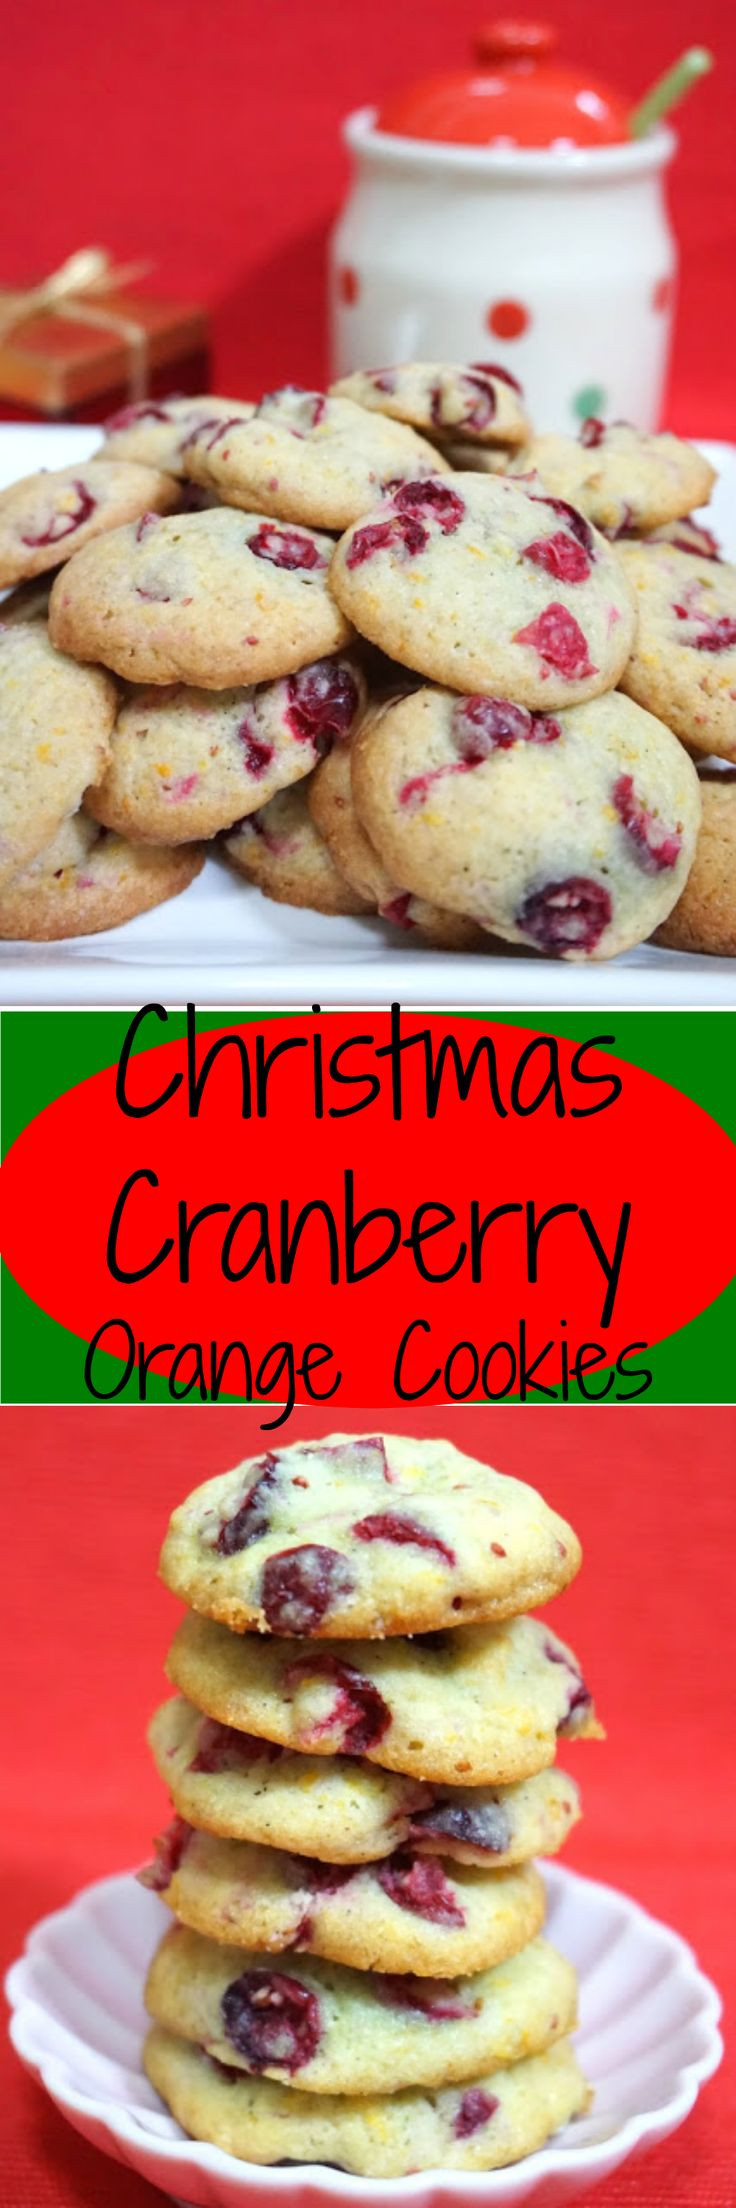 Cranberry Christmas Cookies
 Fresh Cranberry Orange Cookies for Christmas Celebrate